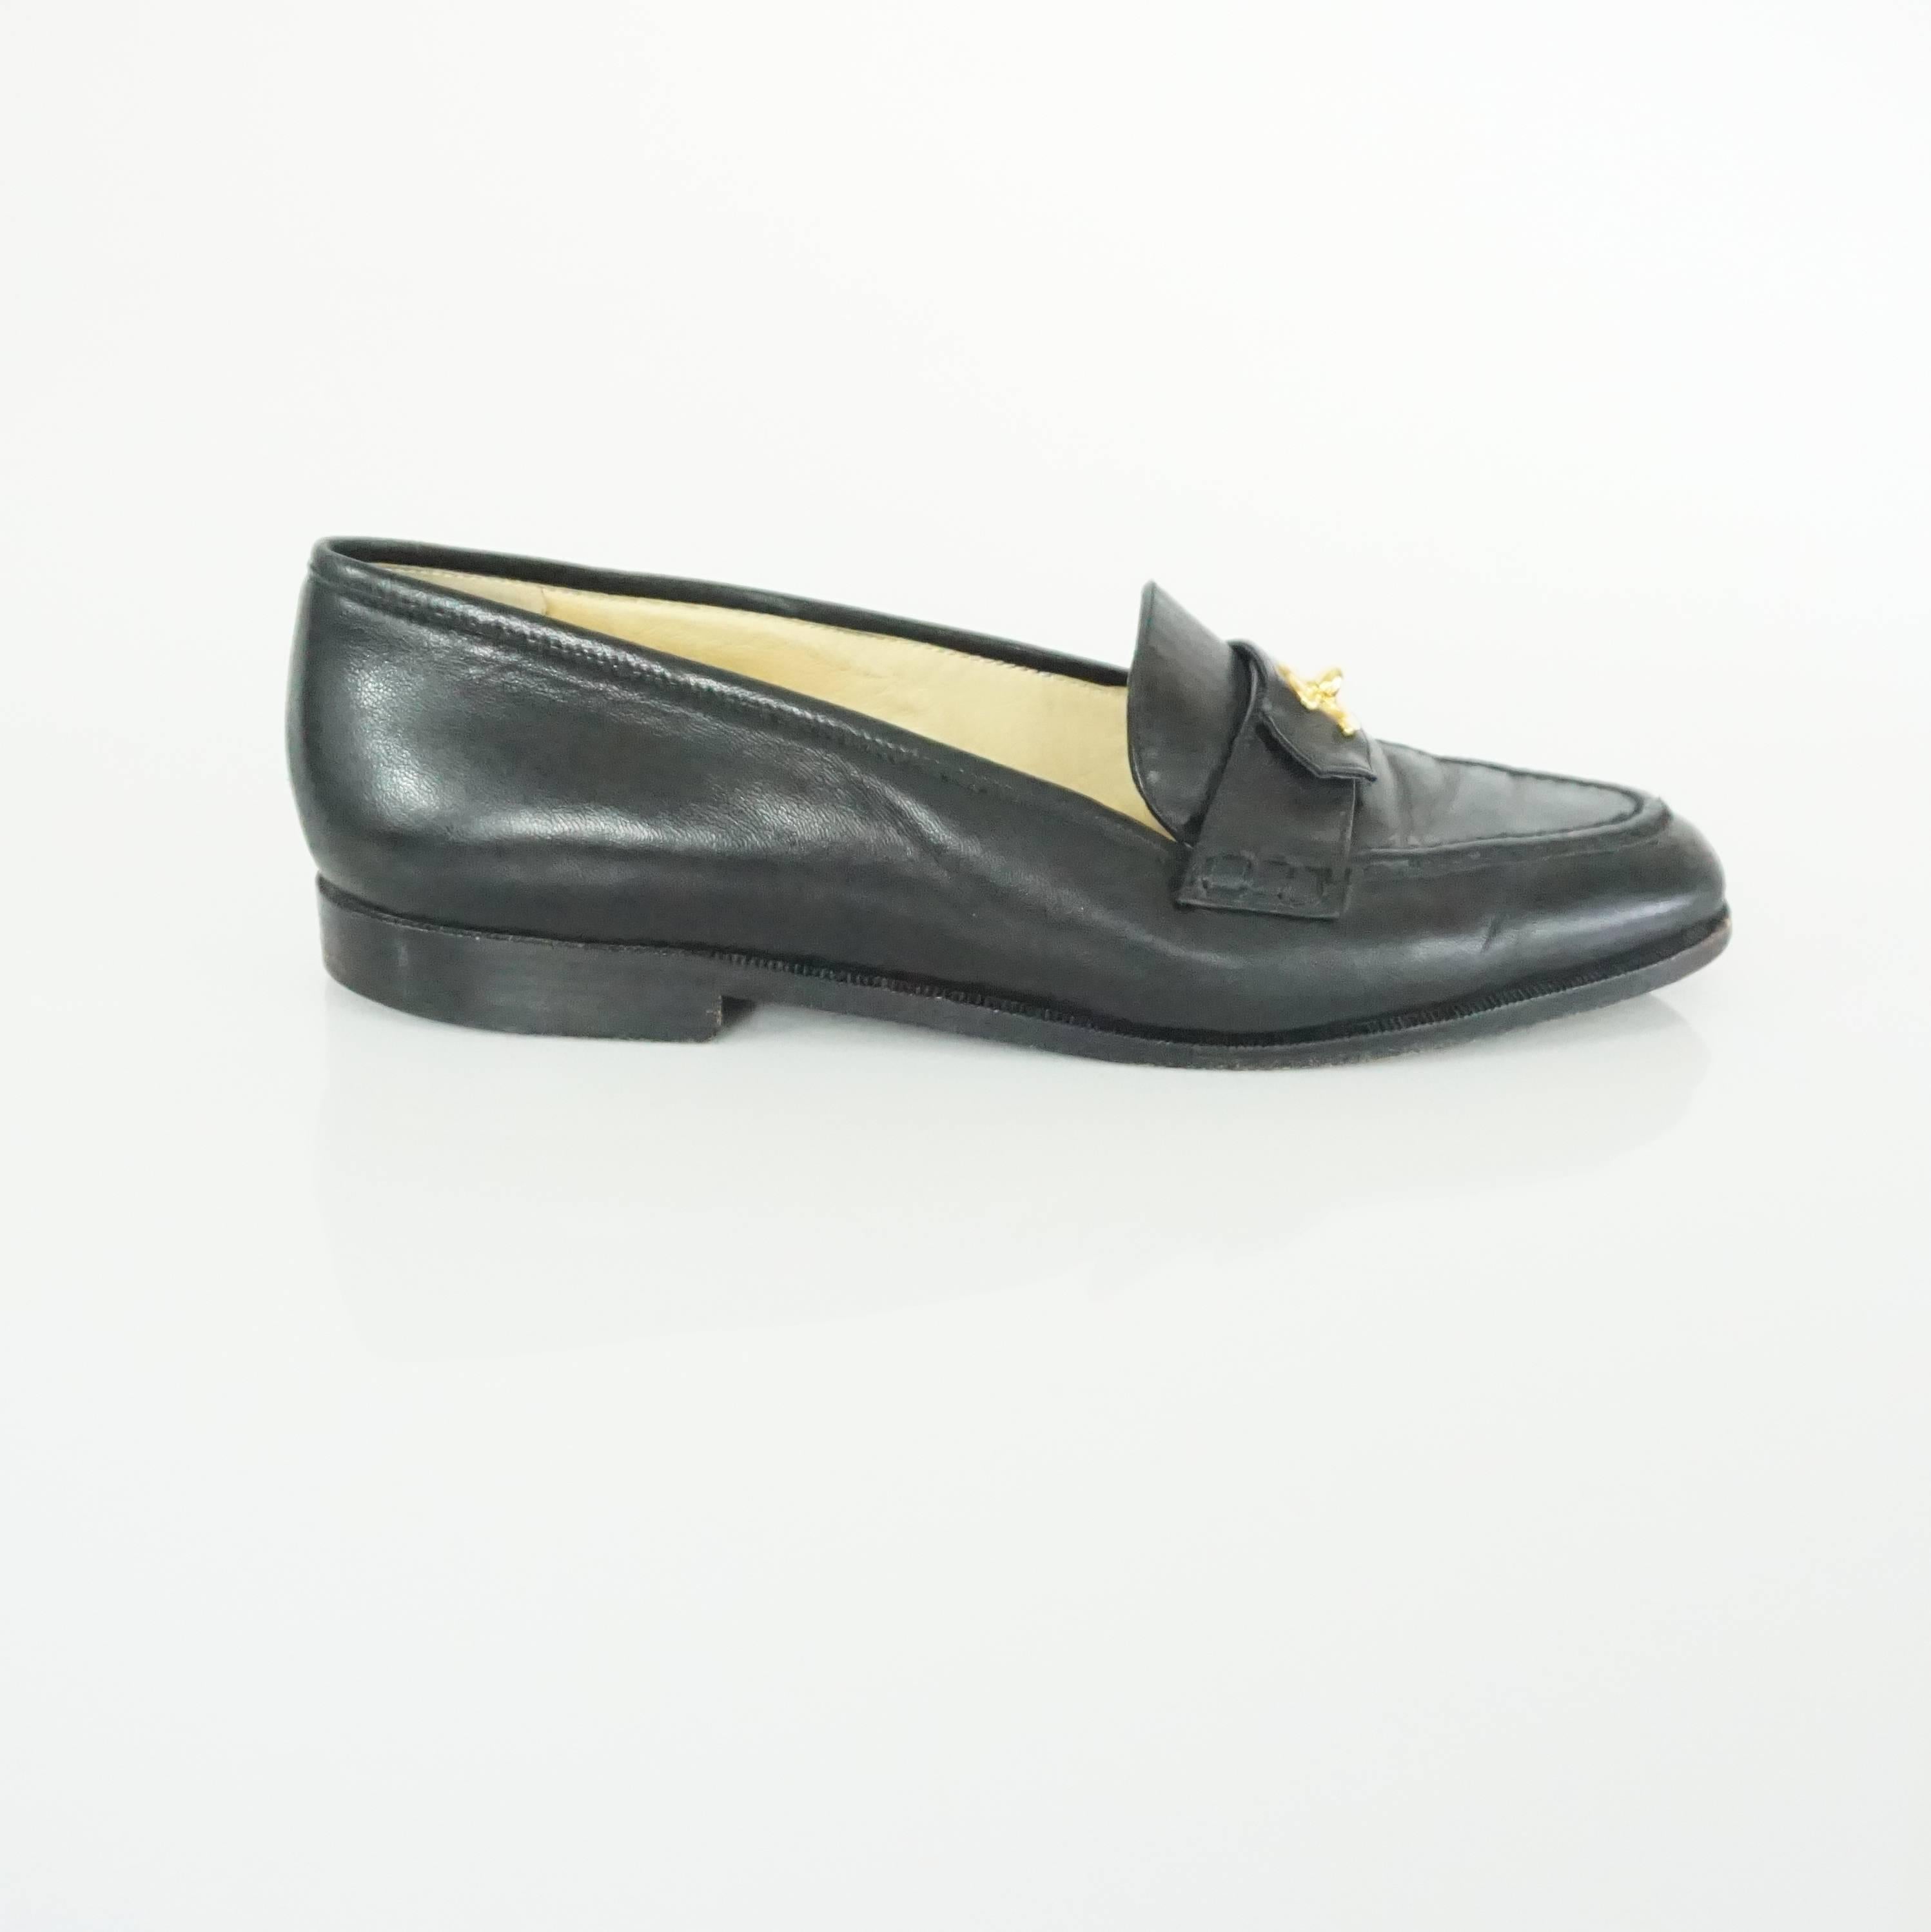 These Chanel black leather loafers feature a gold "CC" turnkey detail on the front. They are in good condition with bottom wear and some scuffing.
